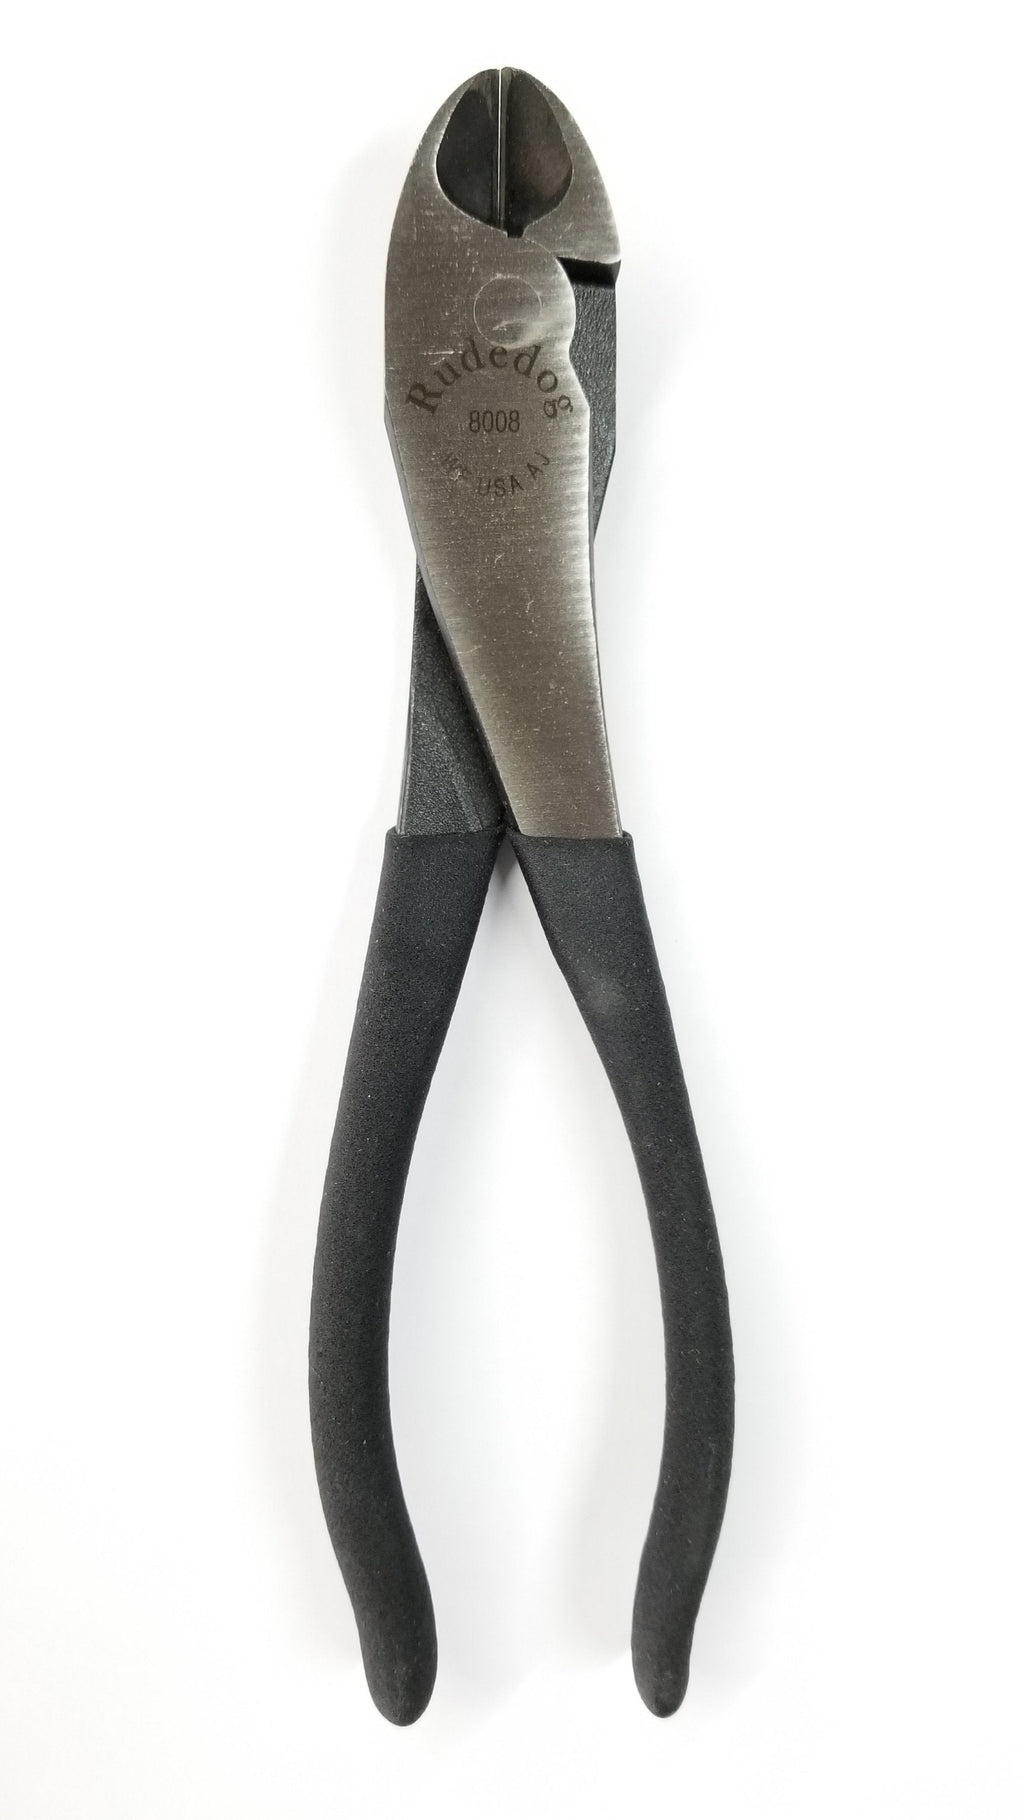 Rudedog USA 8" Ironworkers Diagonal-Cutting Pliers w/ Tether Hole #8008